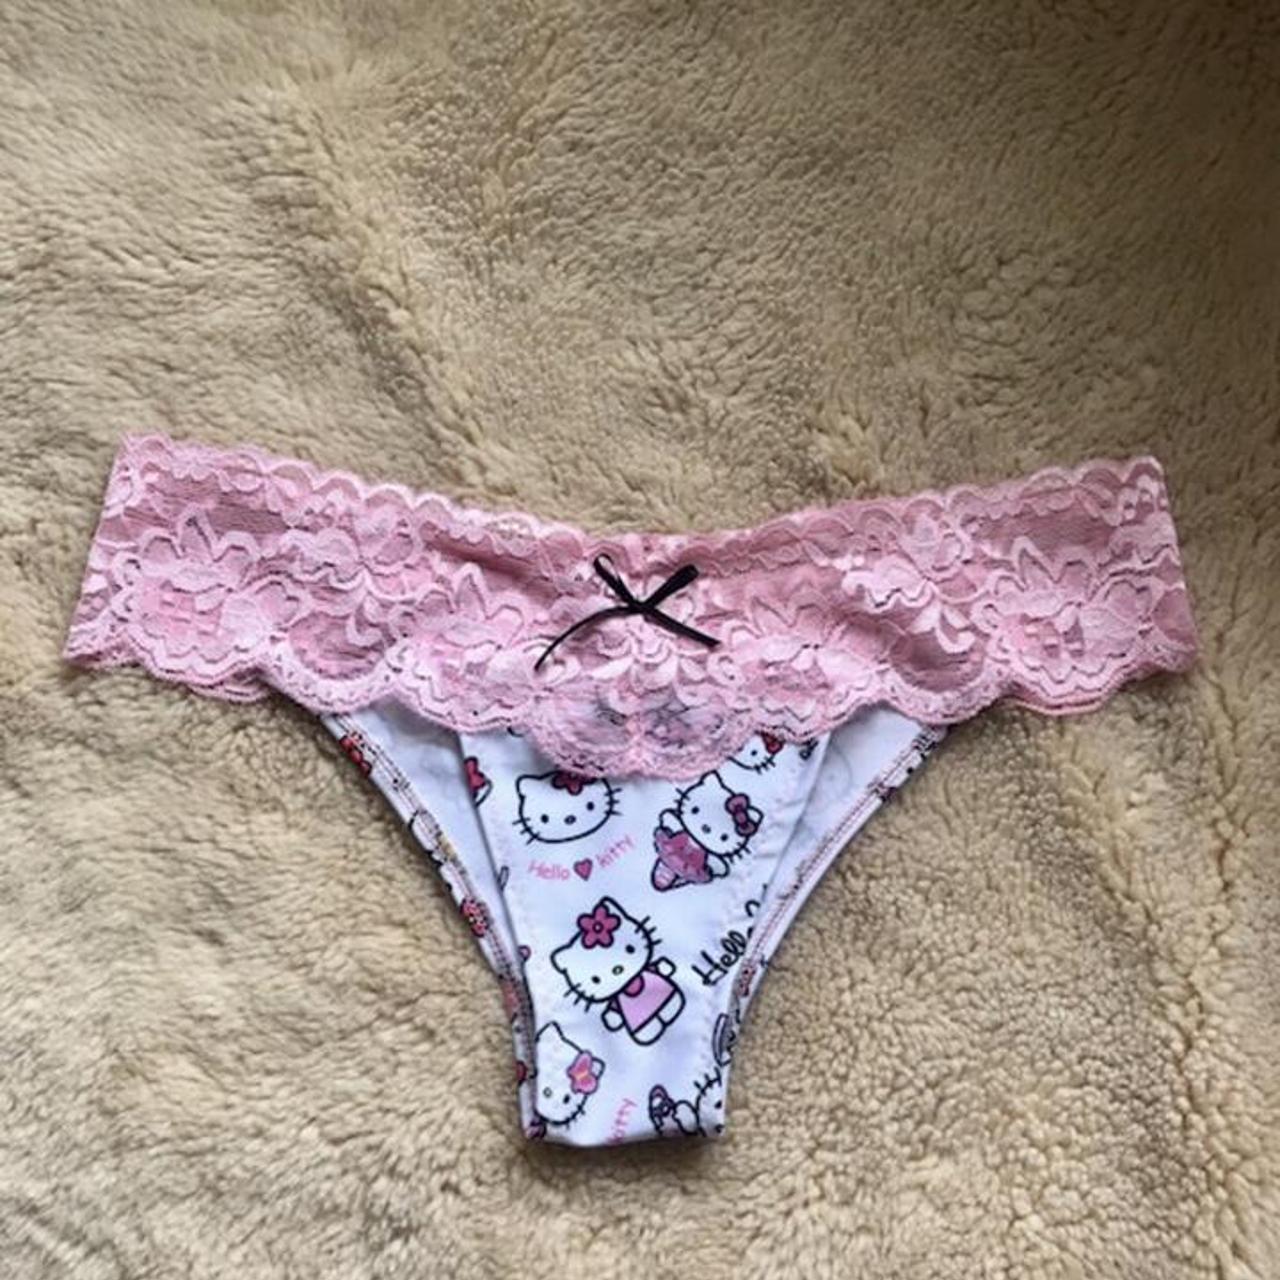 Sexy underwear with Hello Kitty fabric and pink - Depop